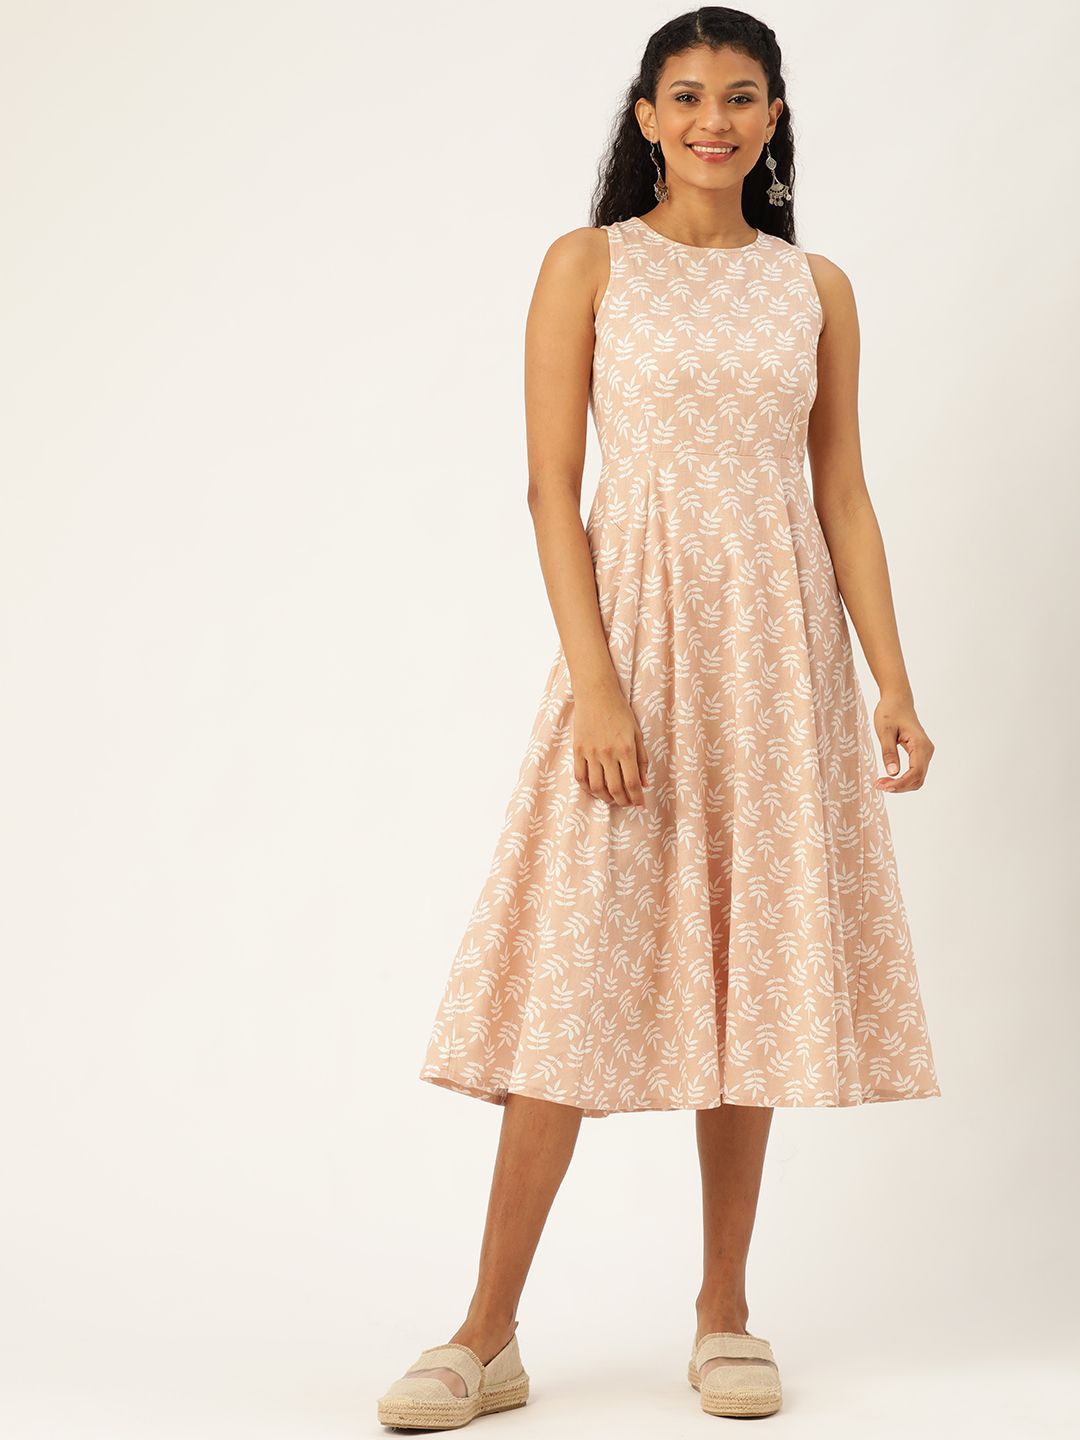 Shae by SASSAFRAS Women Peach-Coloured & White Floral Print A-Line Dress Price in India